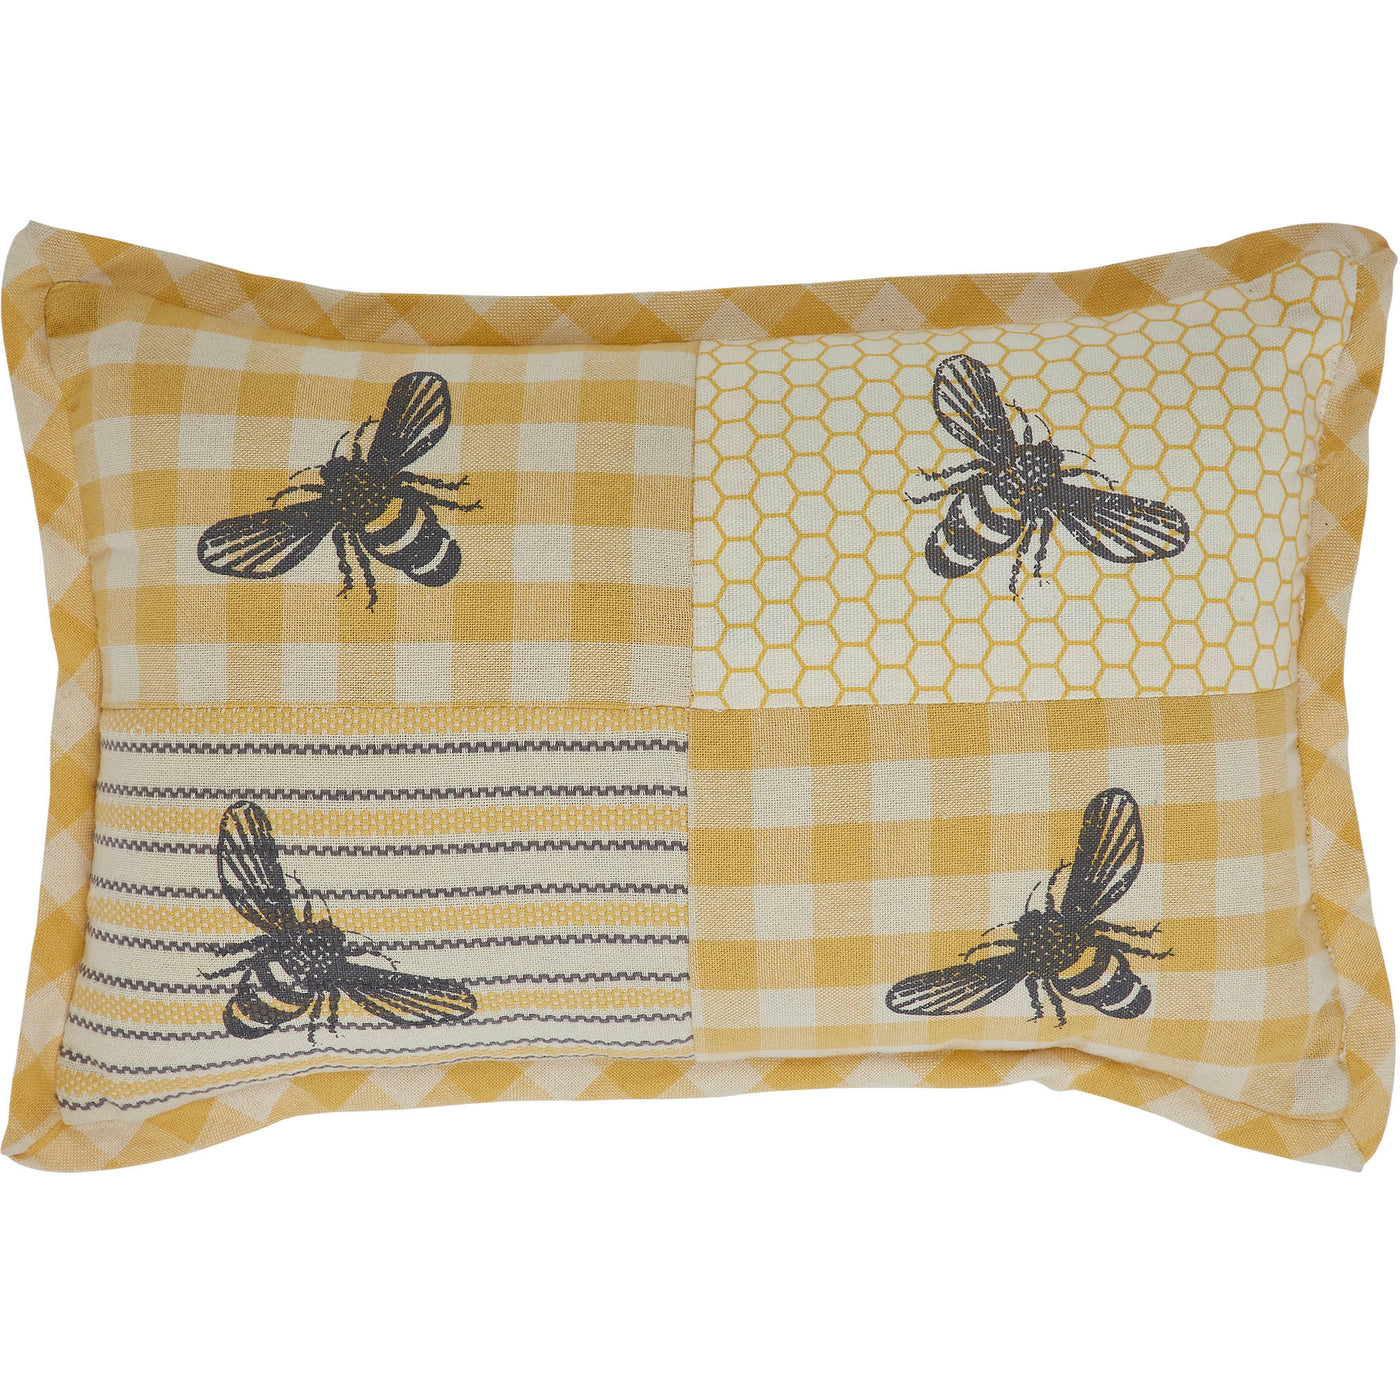 Buzzy Bees Patchwork Bee Small Accent Pillow